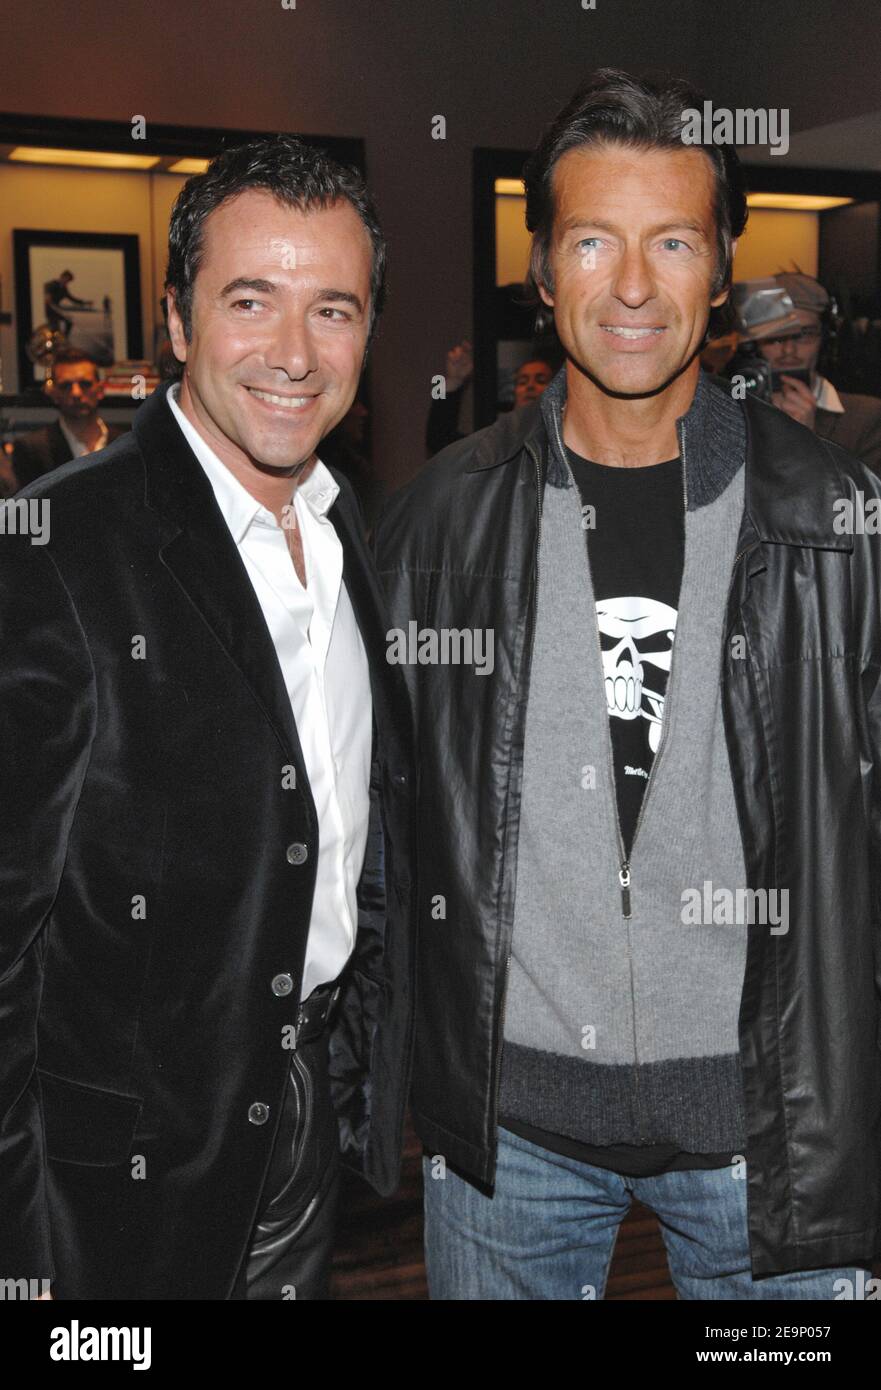 French anchors Bernard Montiel and Alexandre Debanne pose during the  opening party for Tommy Hilfiger's flagship store in Paris, France, on  October 18, 2006. The store, located on the famous 'rue St